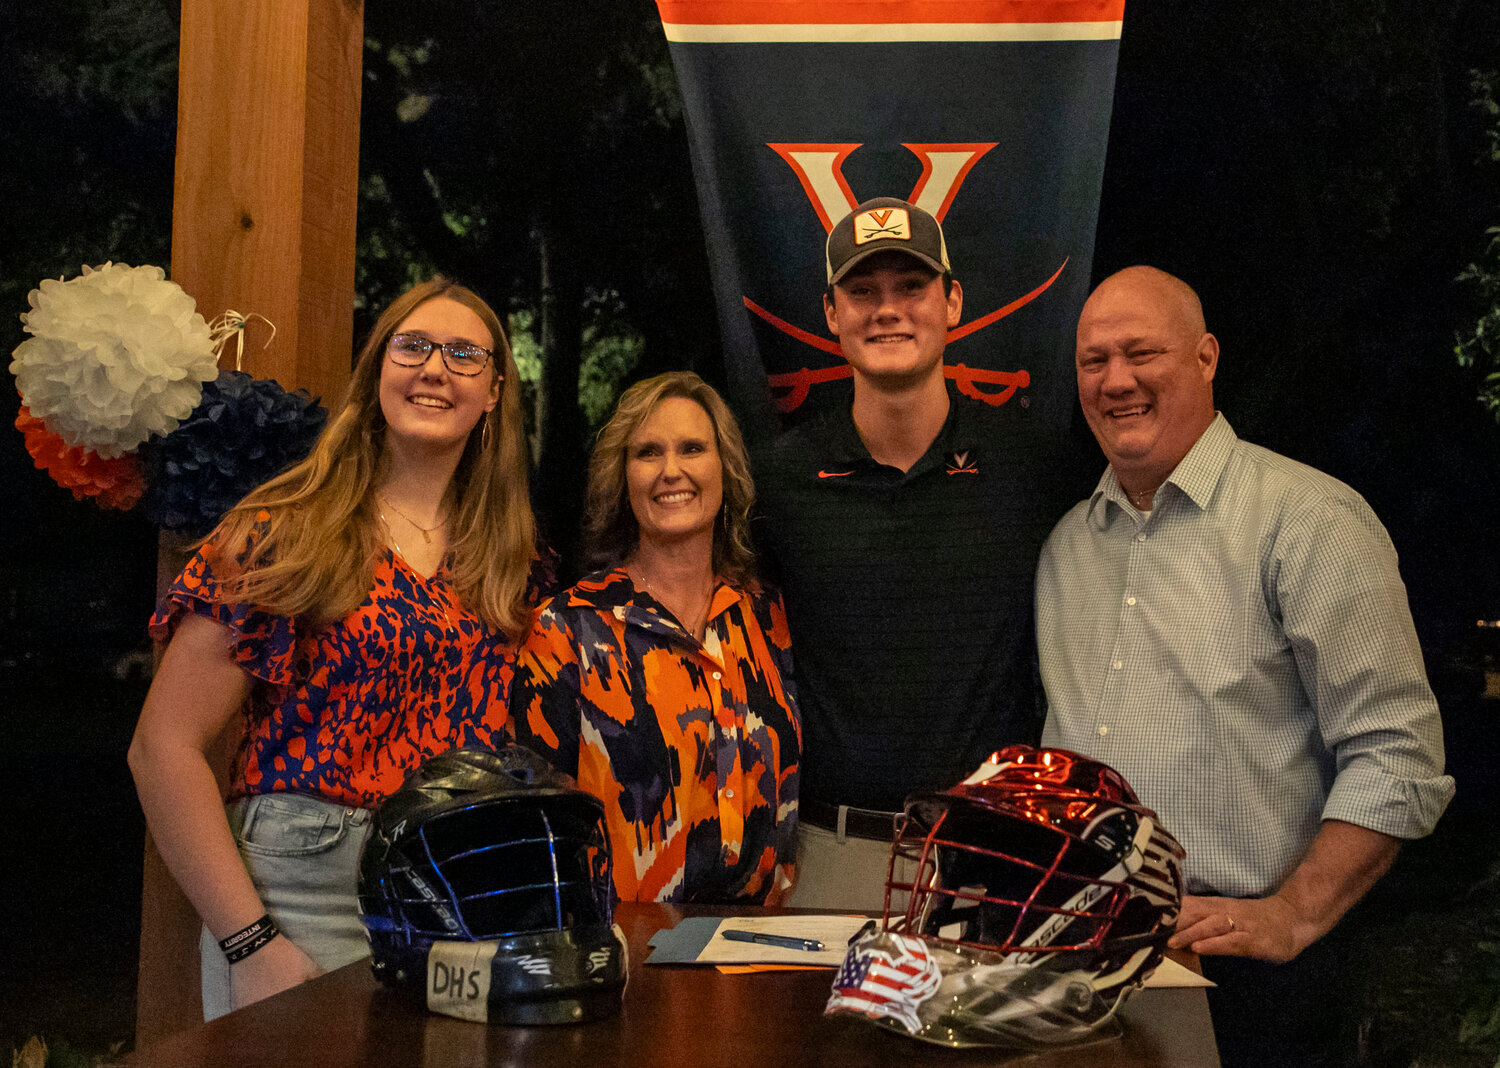 The Capstraw family poses for a photo after Troy cemented his commitment to the Virginia Cavalier lacrosse program during a signing ceremony on Wednesday, Nov. 8, in Daphne.